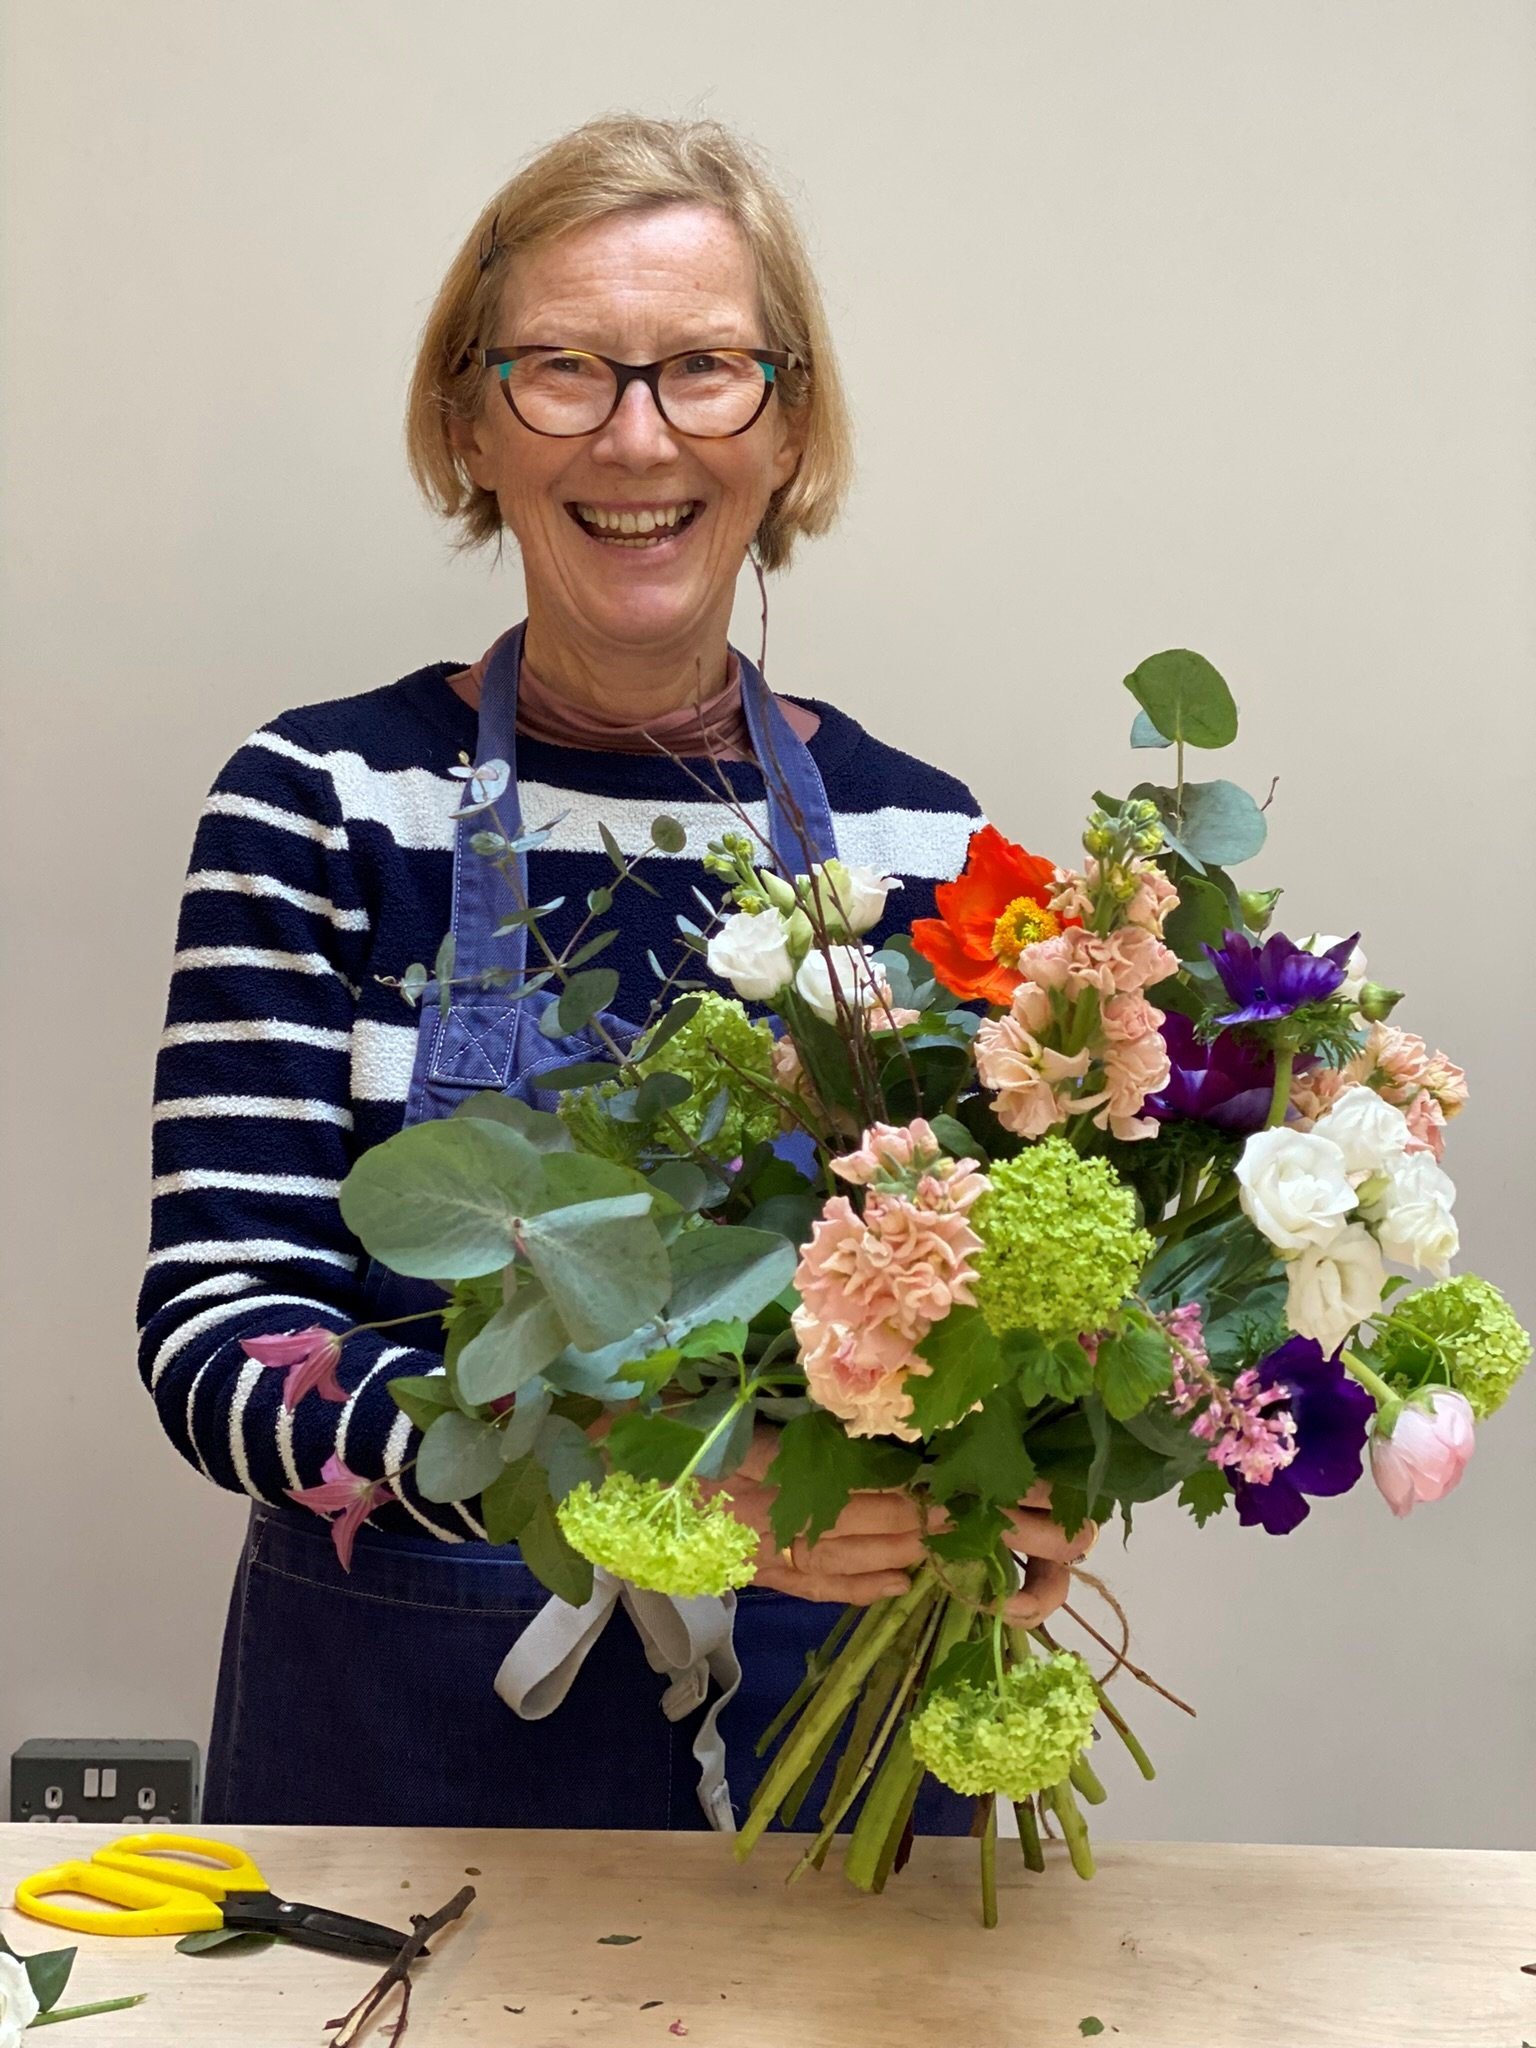 Bath's flower school student holding a vibrant spring hand tied bouquet